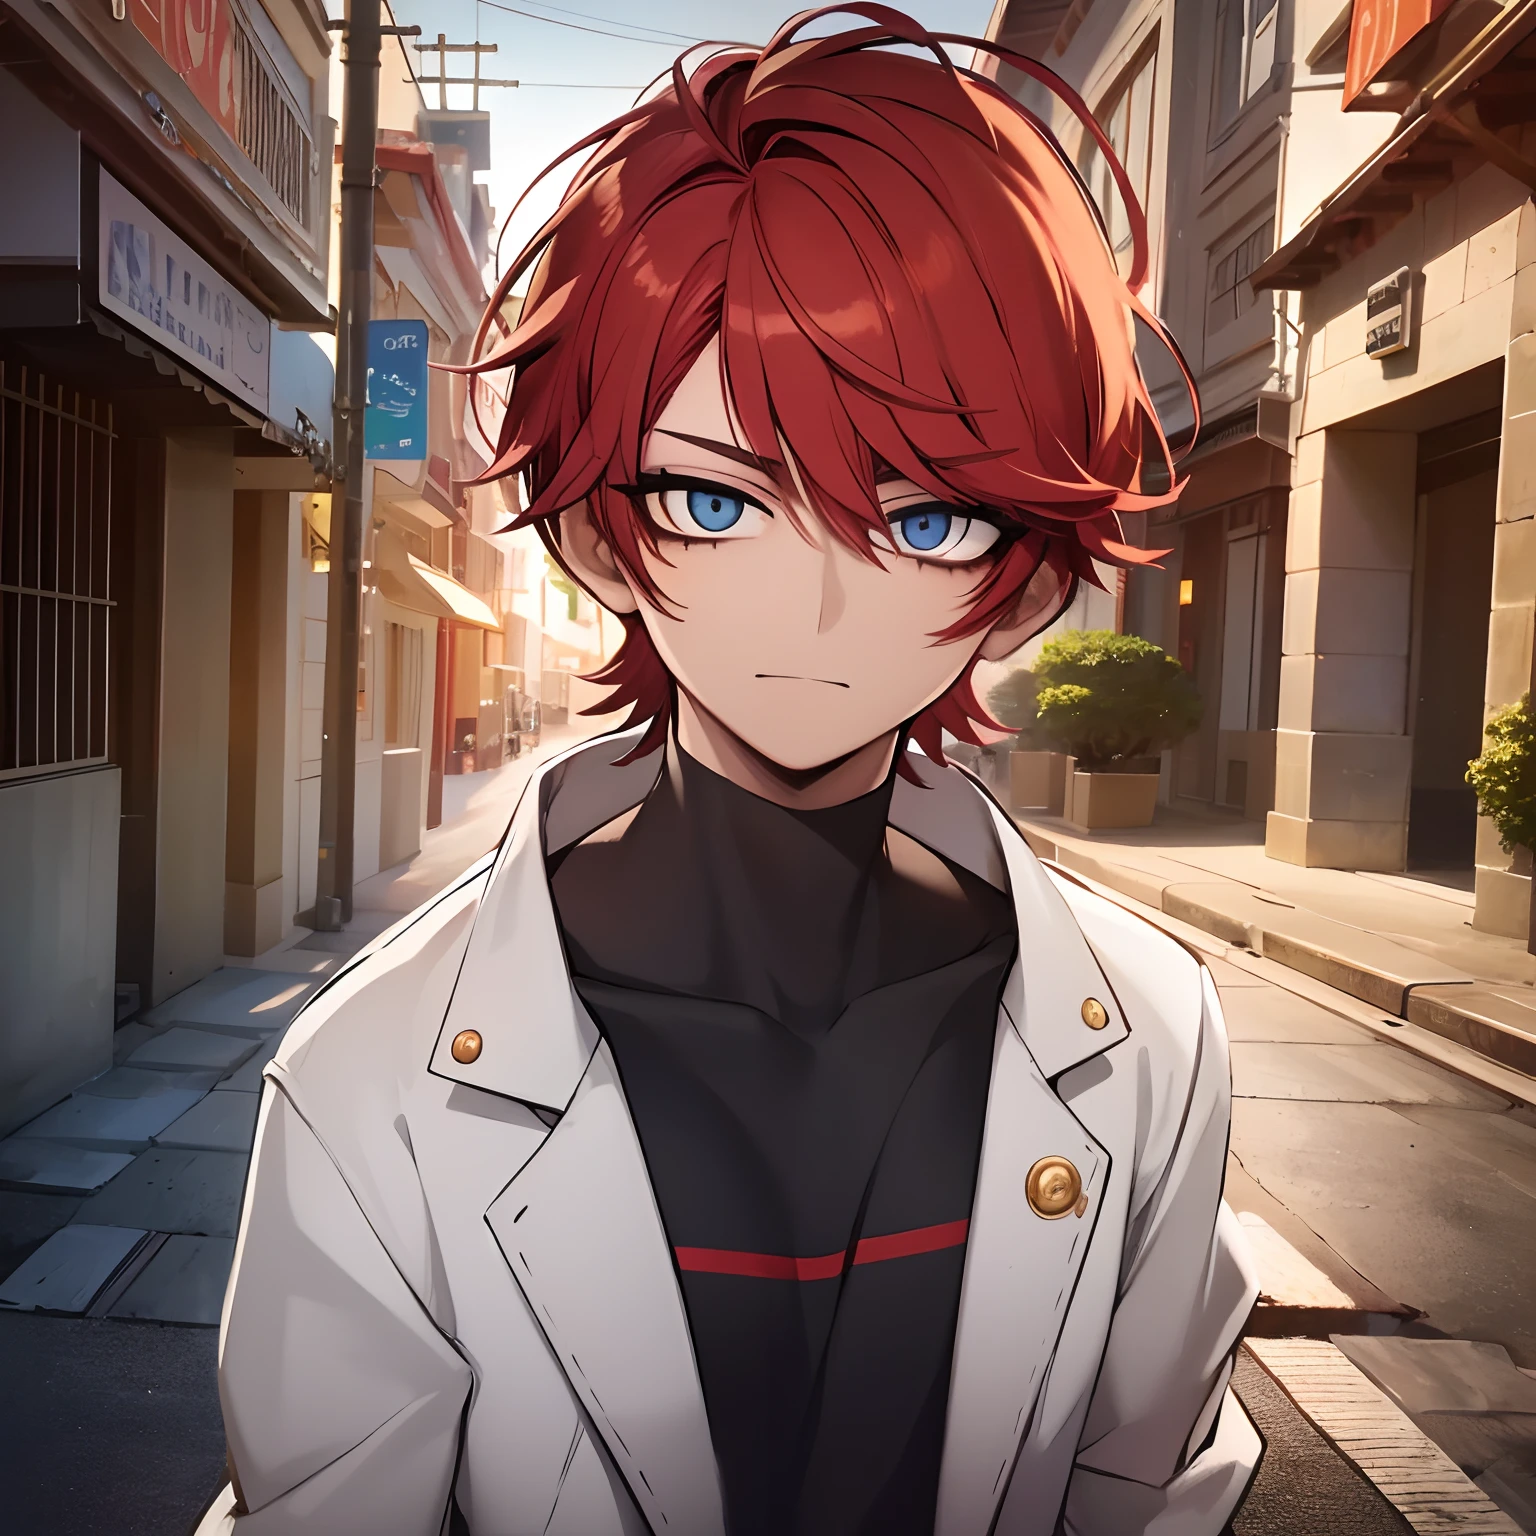 Anime - style image of a man with red hair and blue eyes, tall anime guy with blue eyes, young anime man, too, laranja - Boy Anime cabelo, anime portrait of a handsome man, Boy Anime, male anime character, anime style portrait, male anime style, handsome anime pose, anime moe artstyle, anime handsome man, key anime art